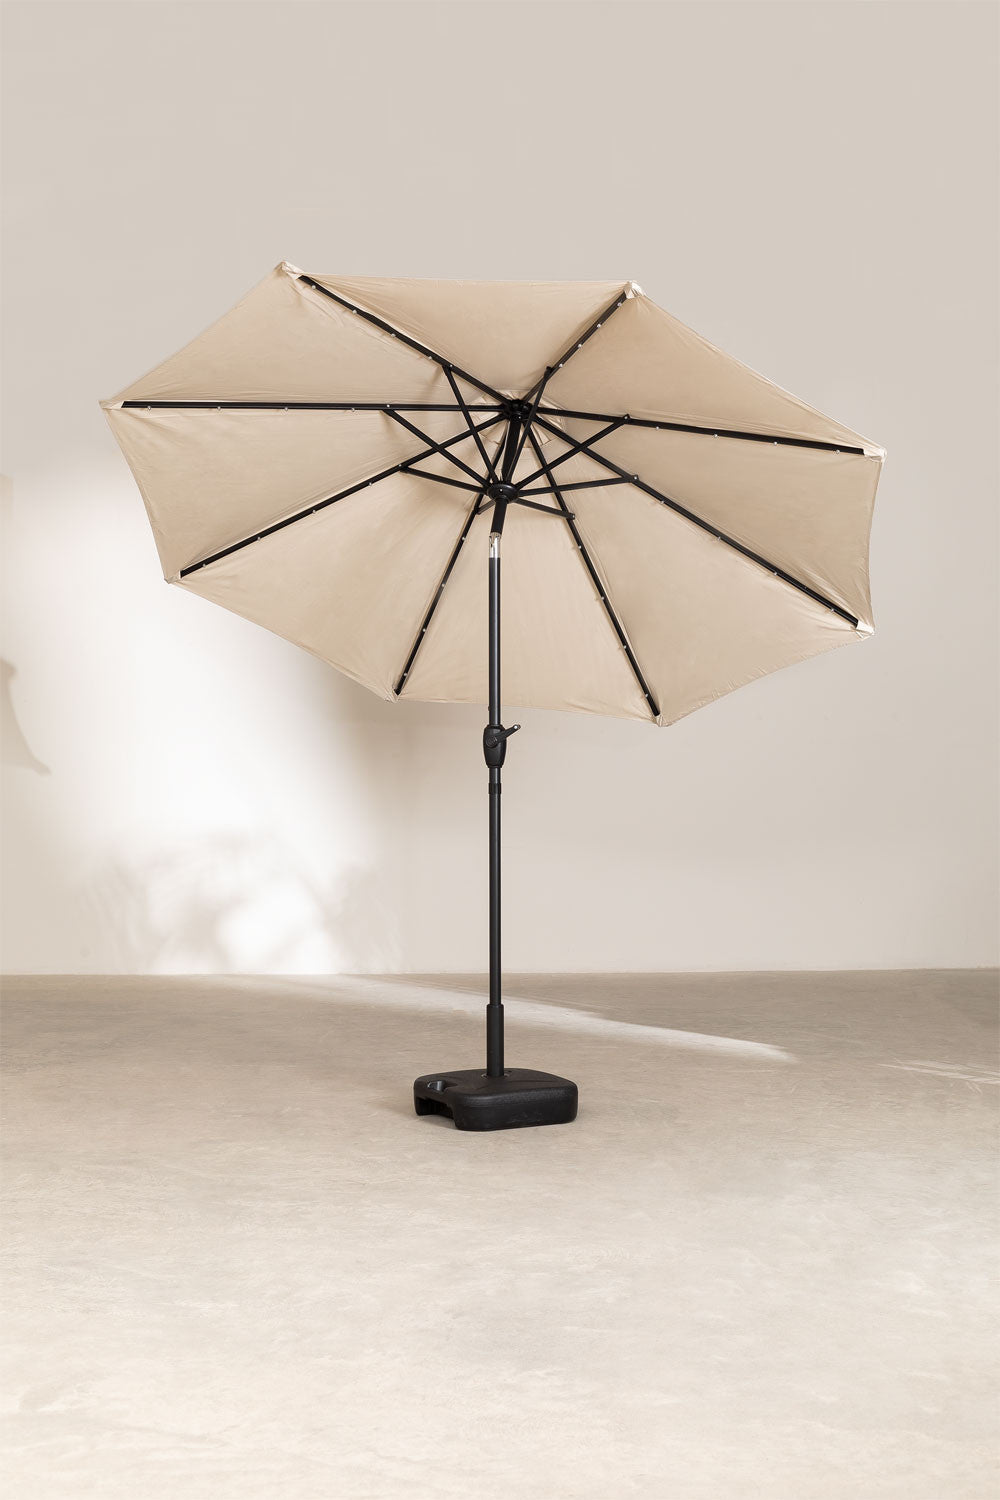 PARASOL with BUILT IN LED LIGHTING - APOLLO